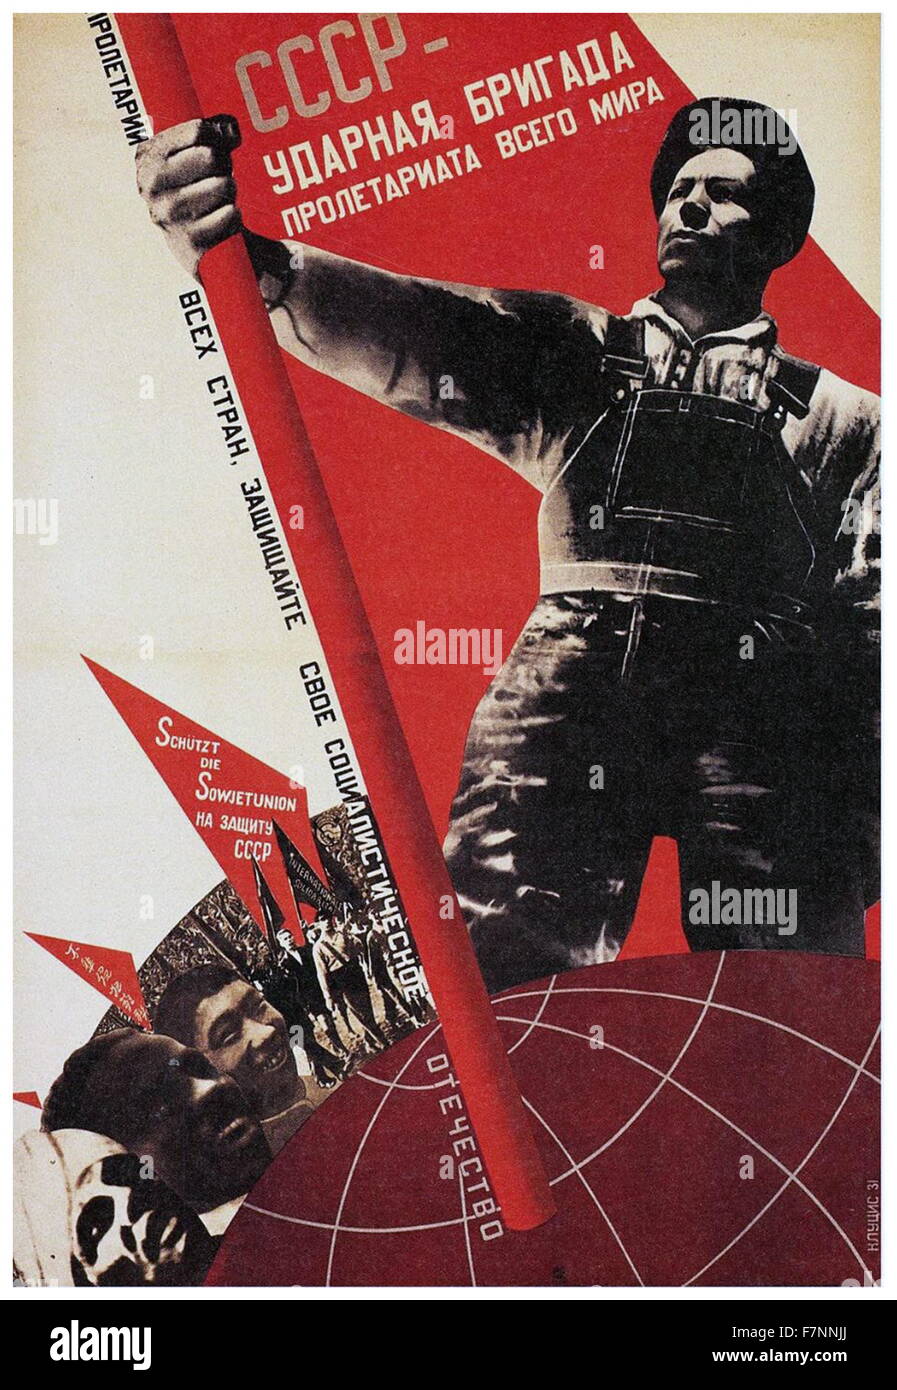 Soviet Union propaganda poster. Text reads 'U.S.S.R. - shock brigade of proletariat of all world! Workers of the world protect the socialist fatherland.' Stock Photo